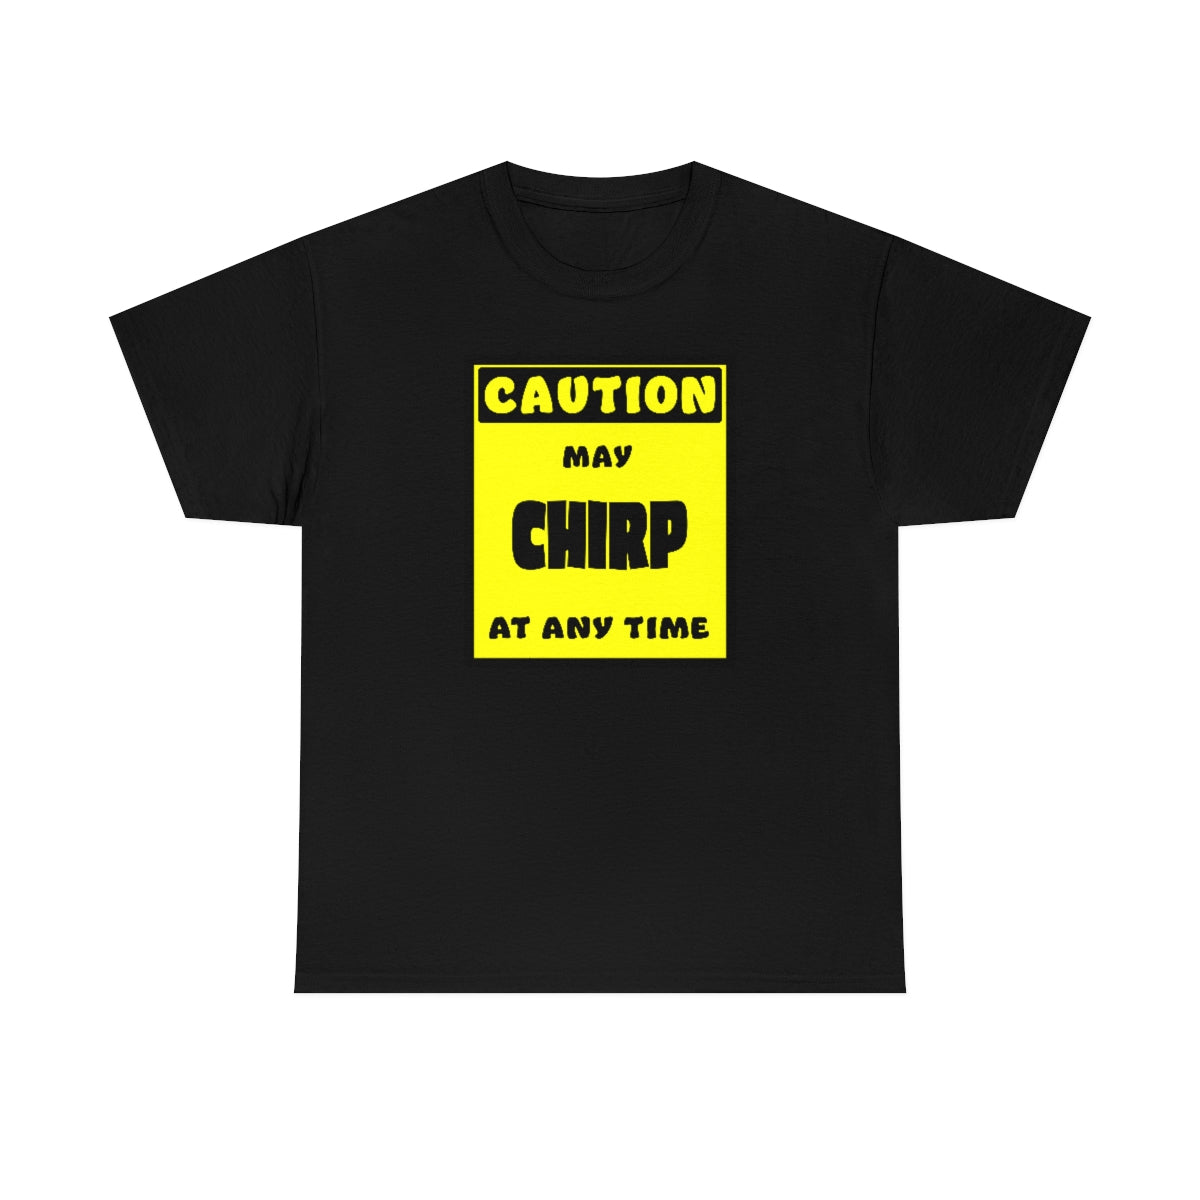 CAUTION! May CHIRP at any time! - T-Shirt T-Shirt AFLT-Whootorca Black S 